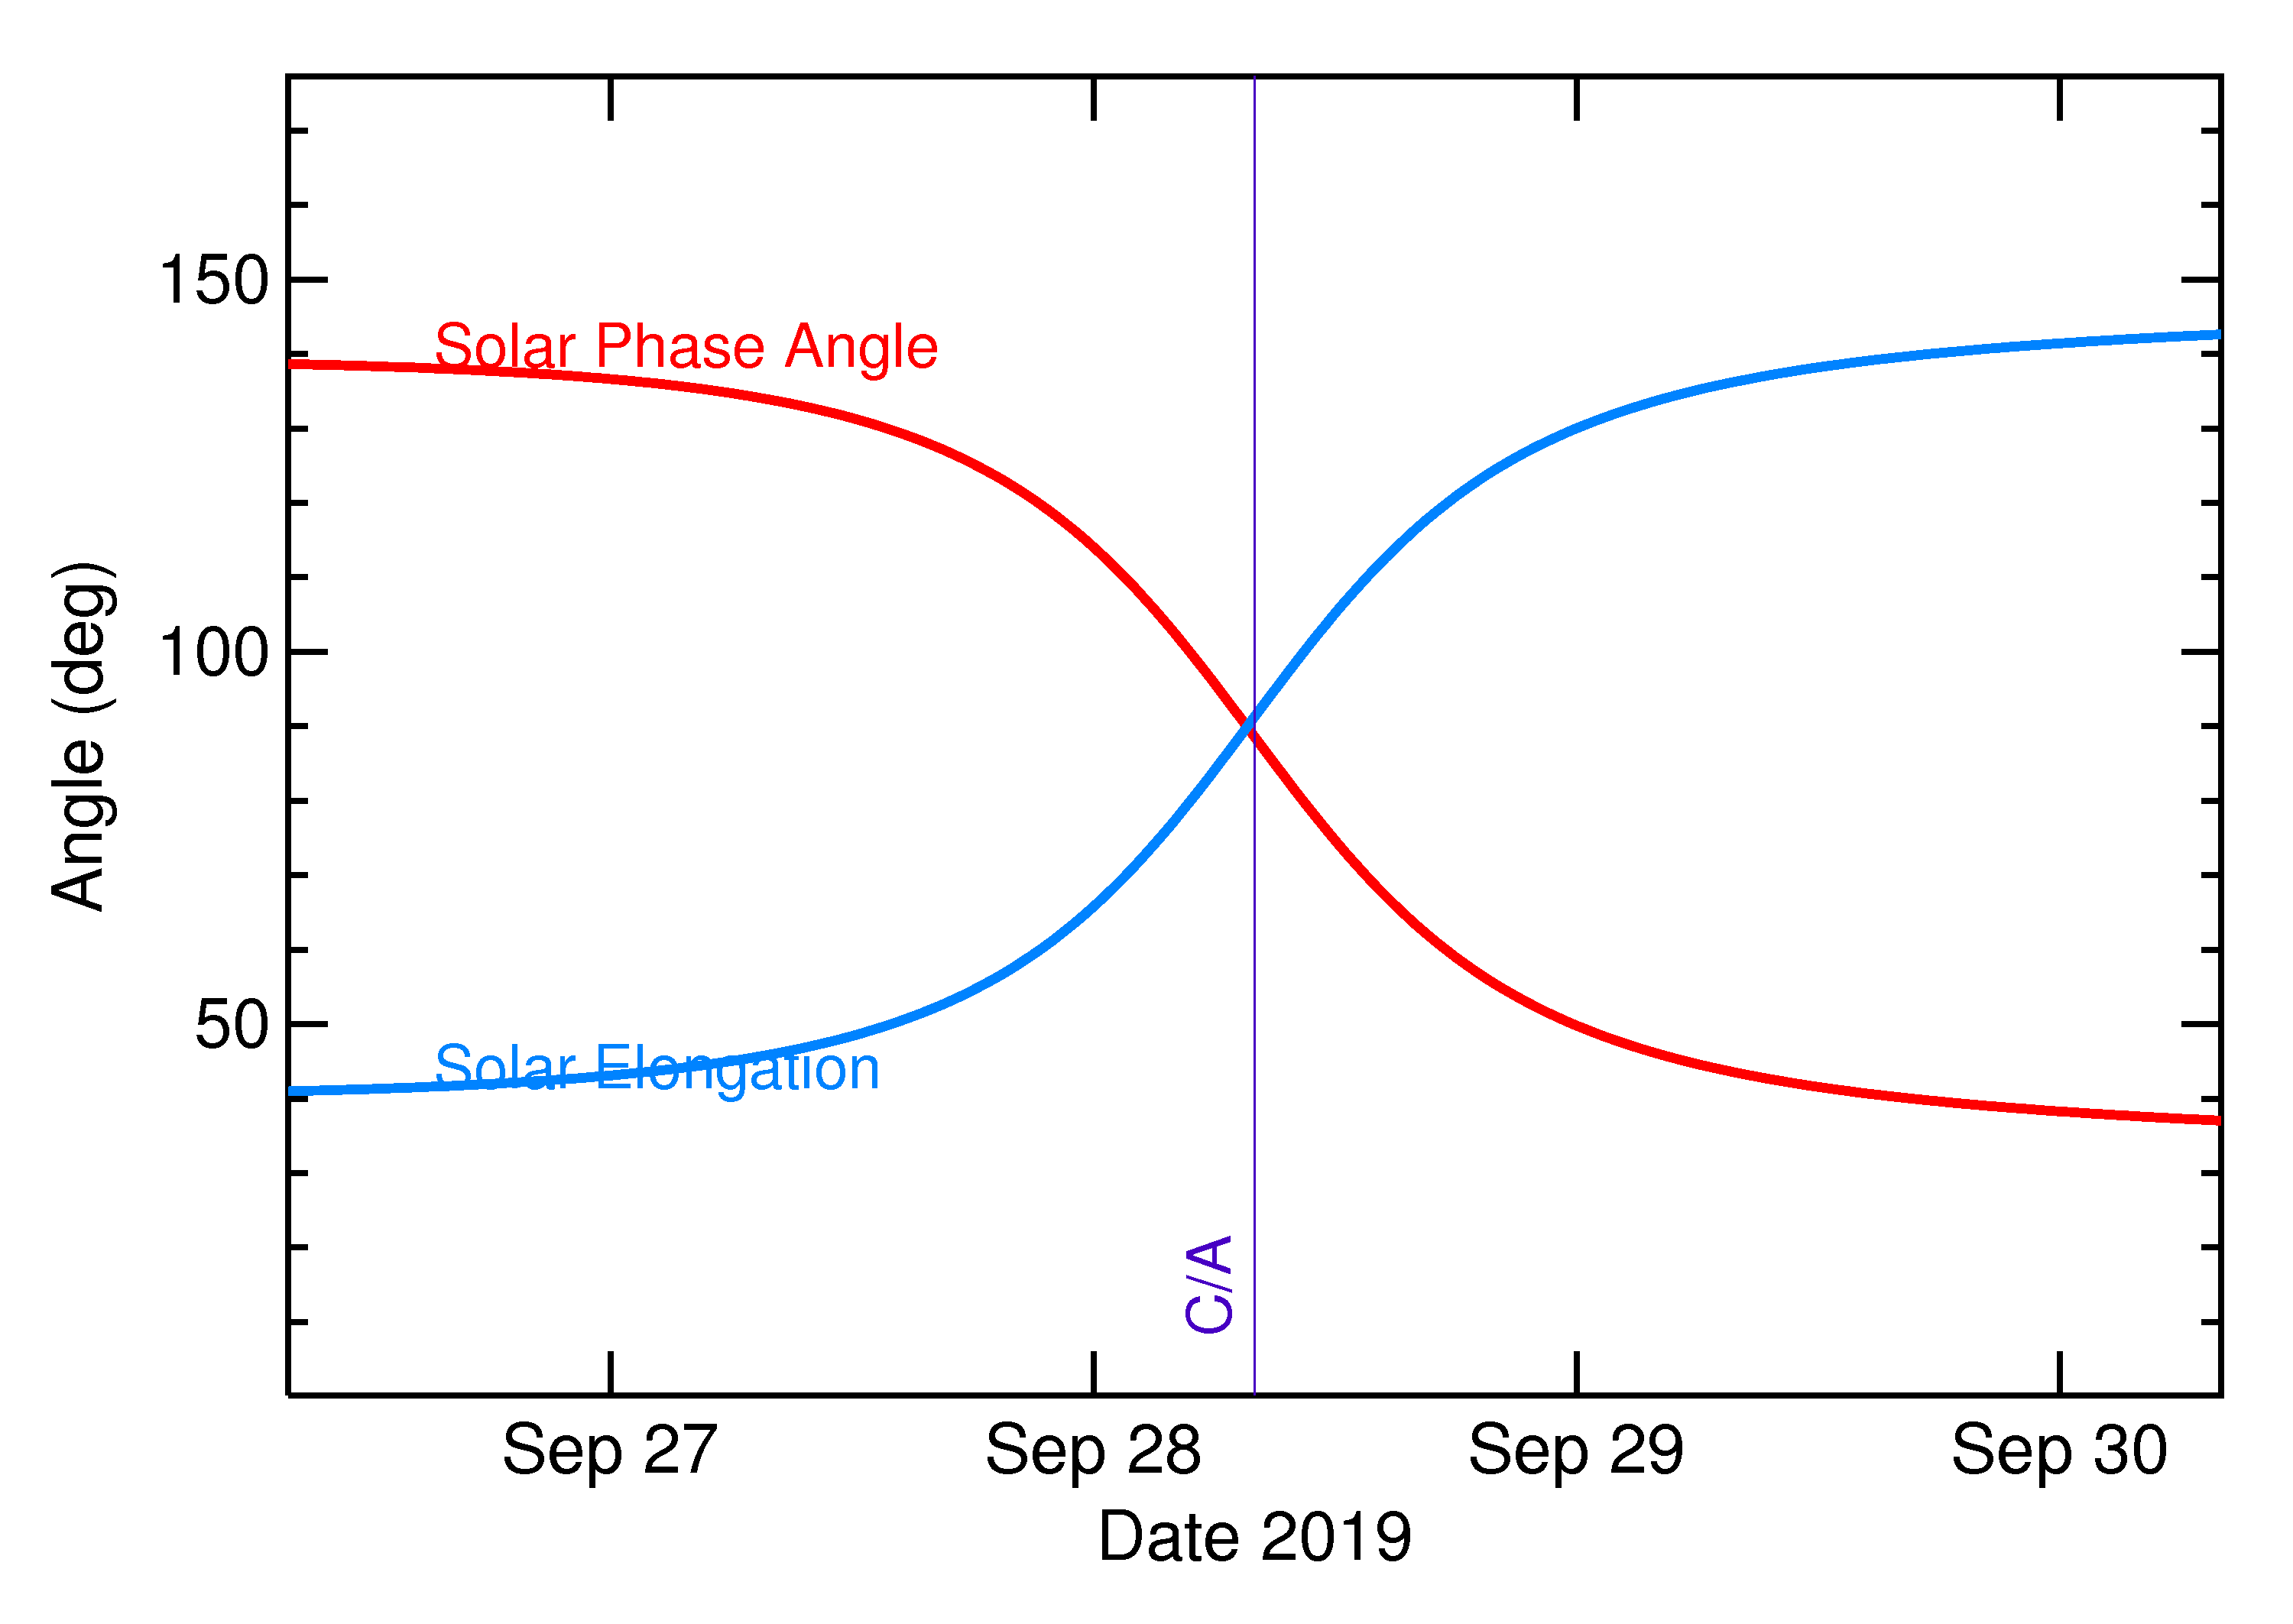 Solar Elongation and Solar Phase Angle of 2019 SX8 in the days around closest approach